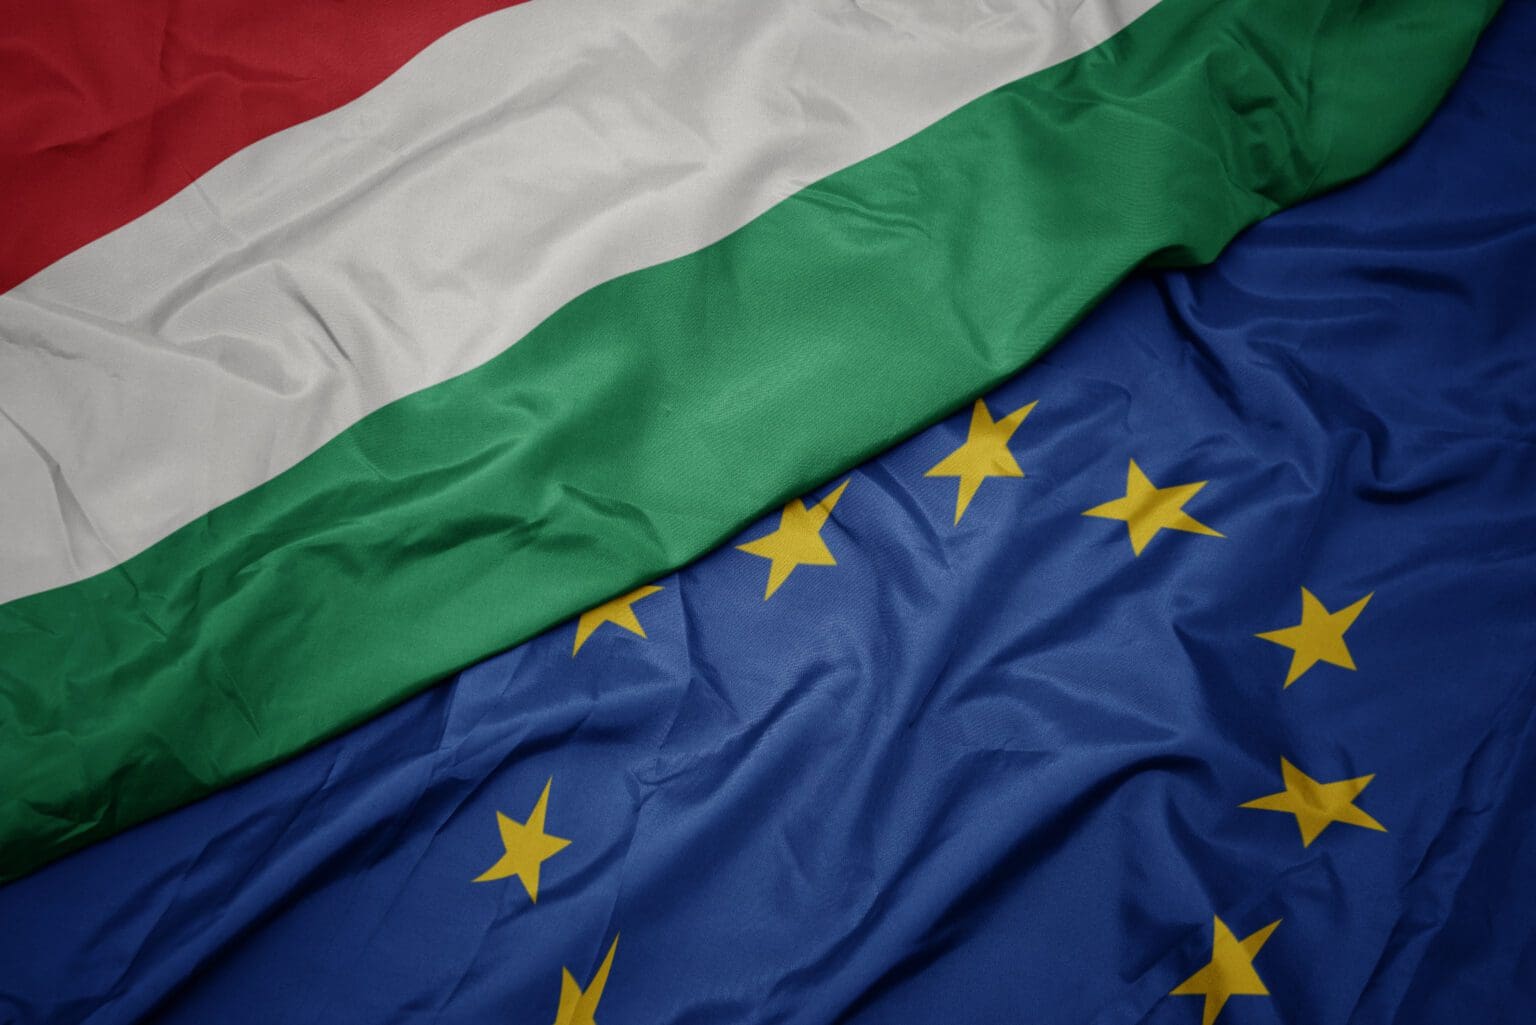 Hungarian Think Tank to Shake Up Brussels